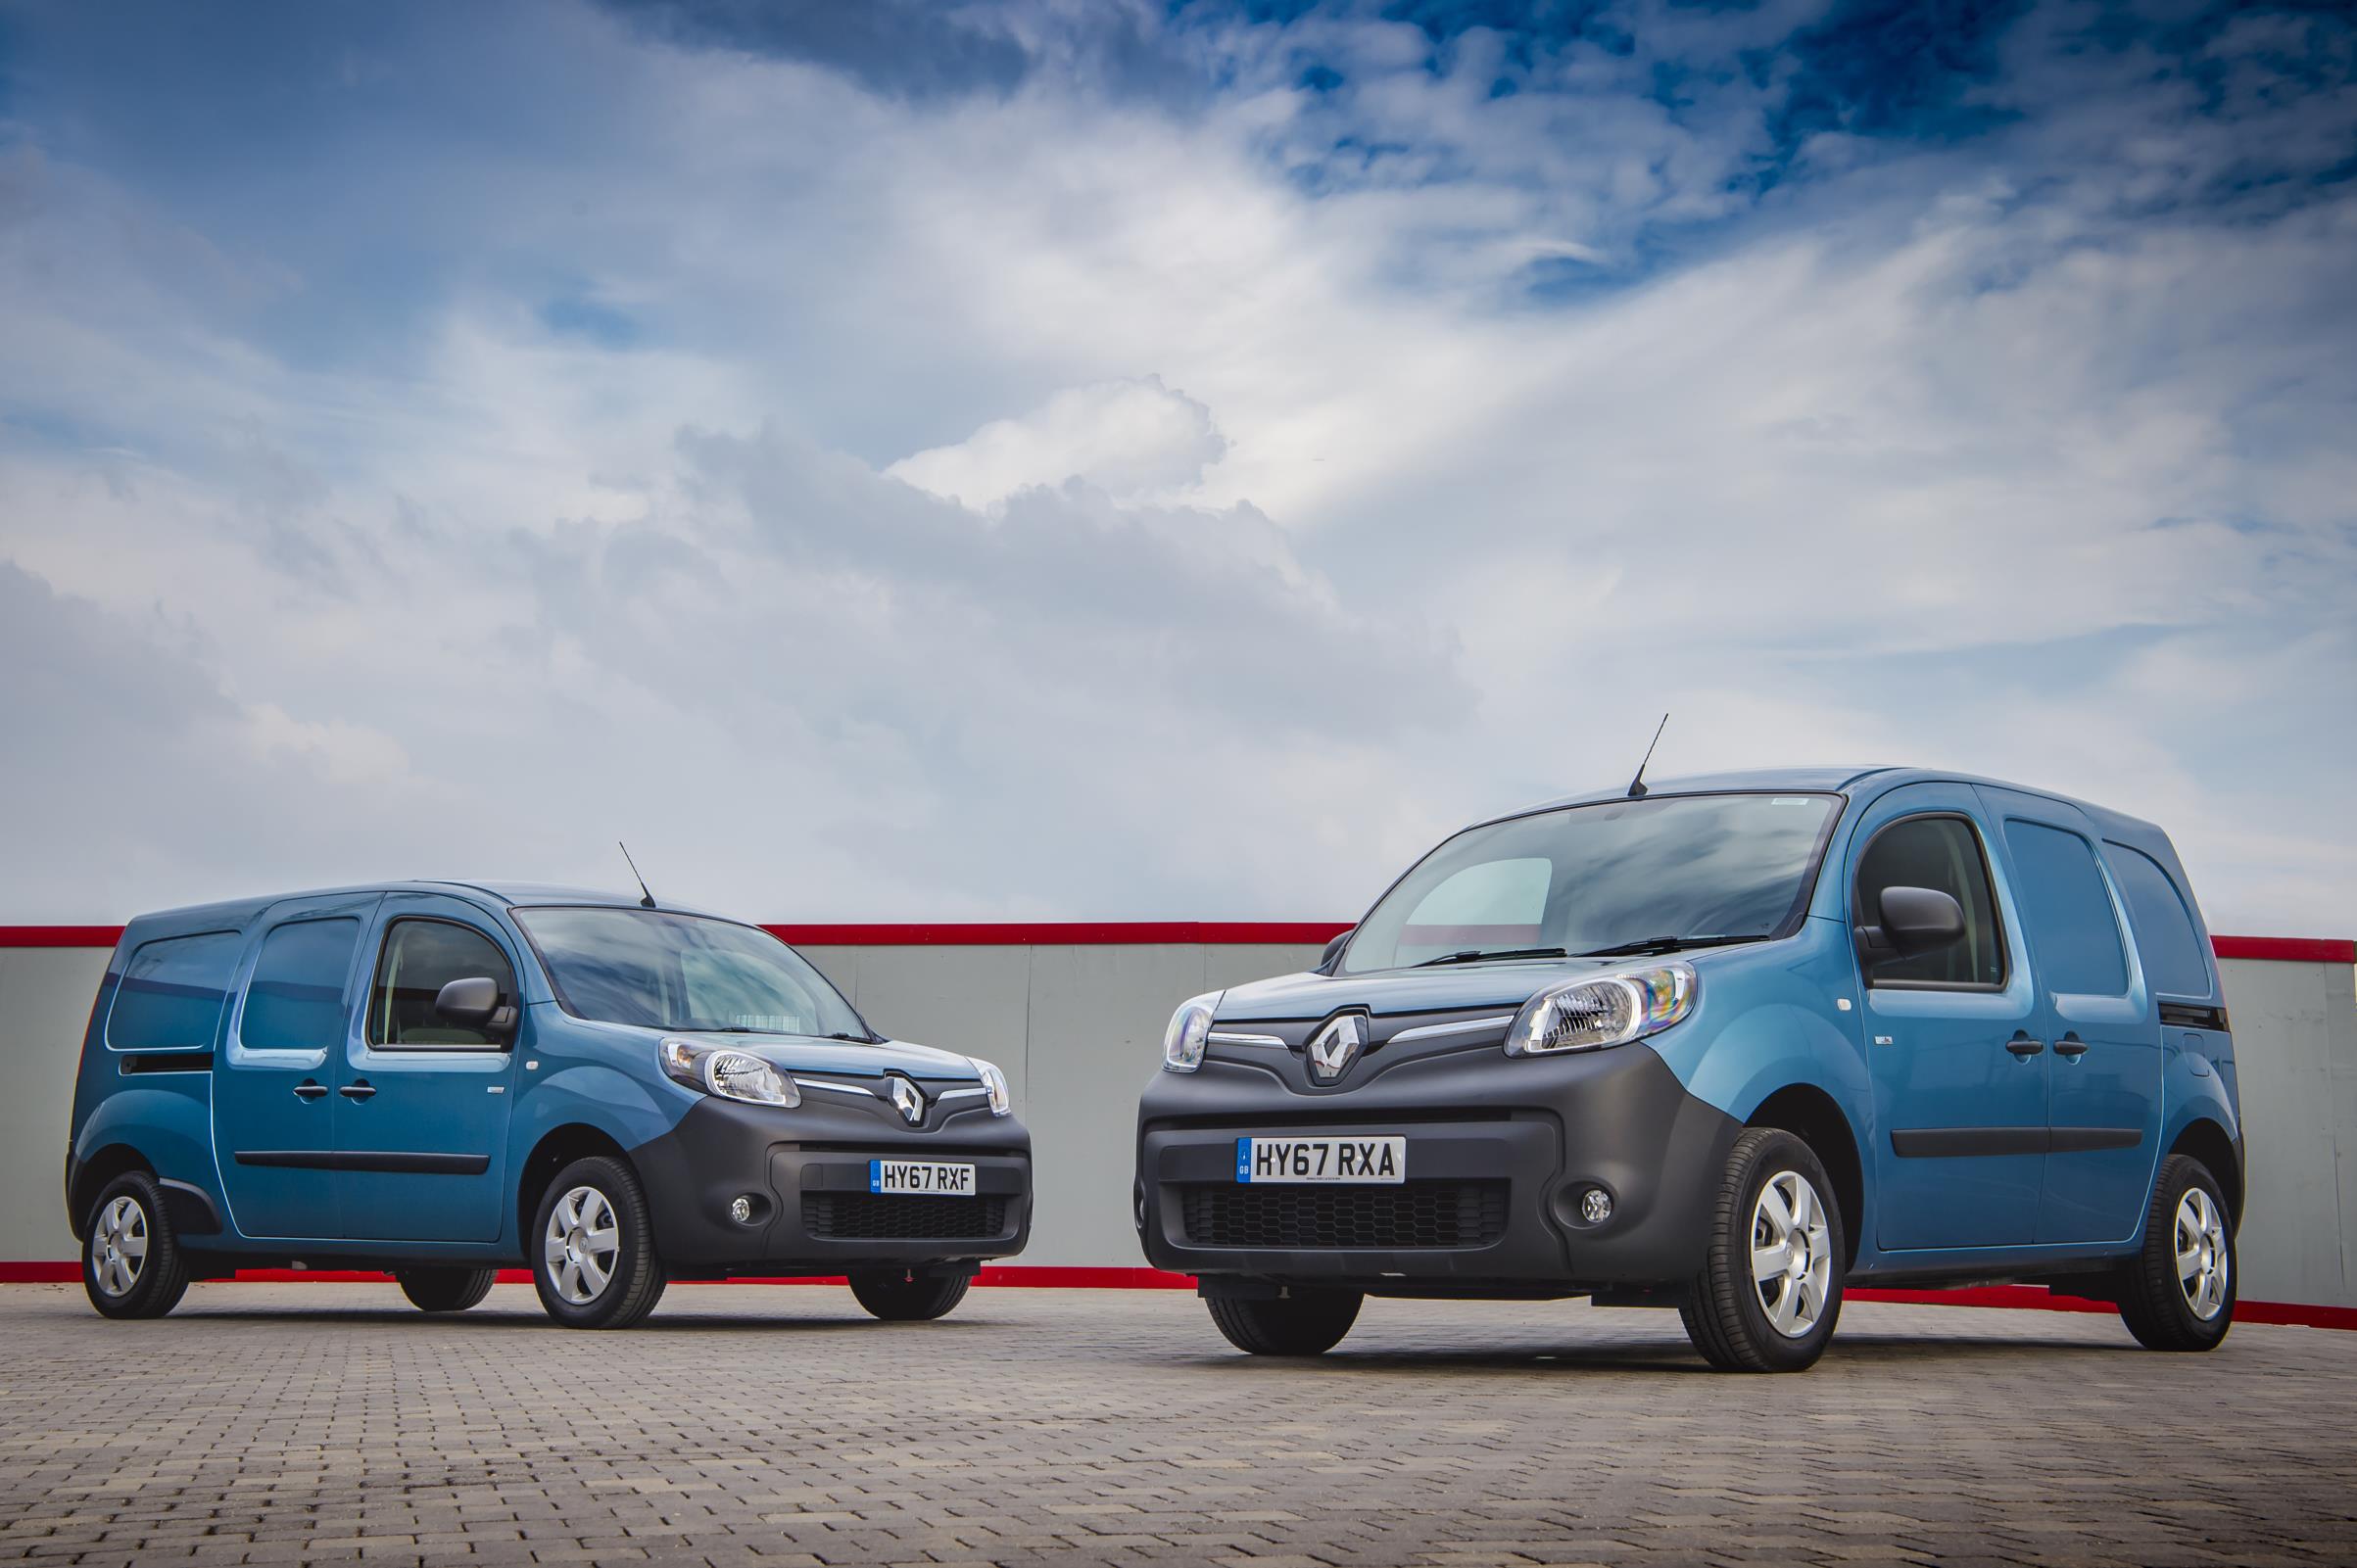 Used van market hits new June with a 30-40 per cent rise in prices – Car Dealer Magazine